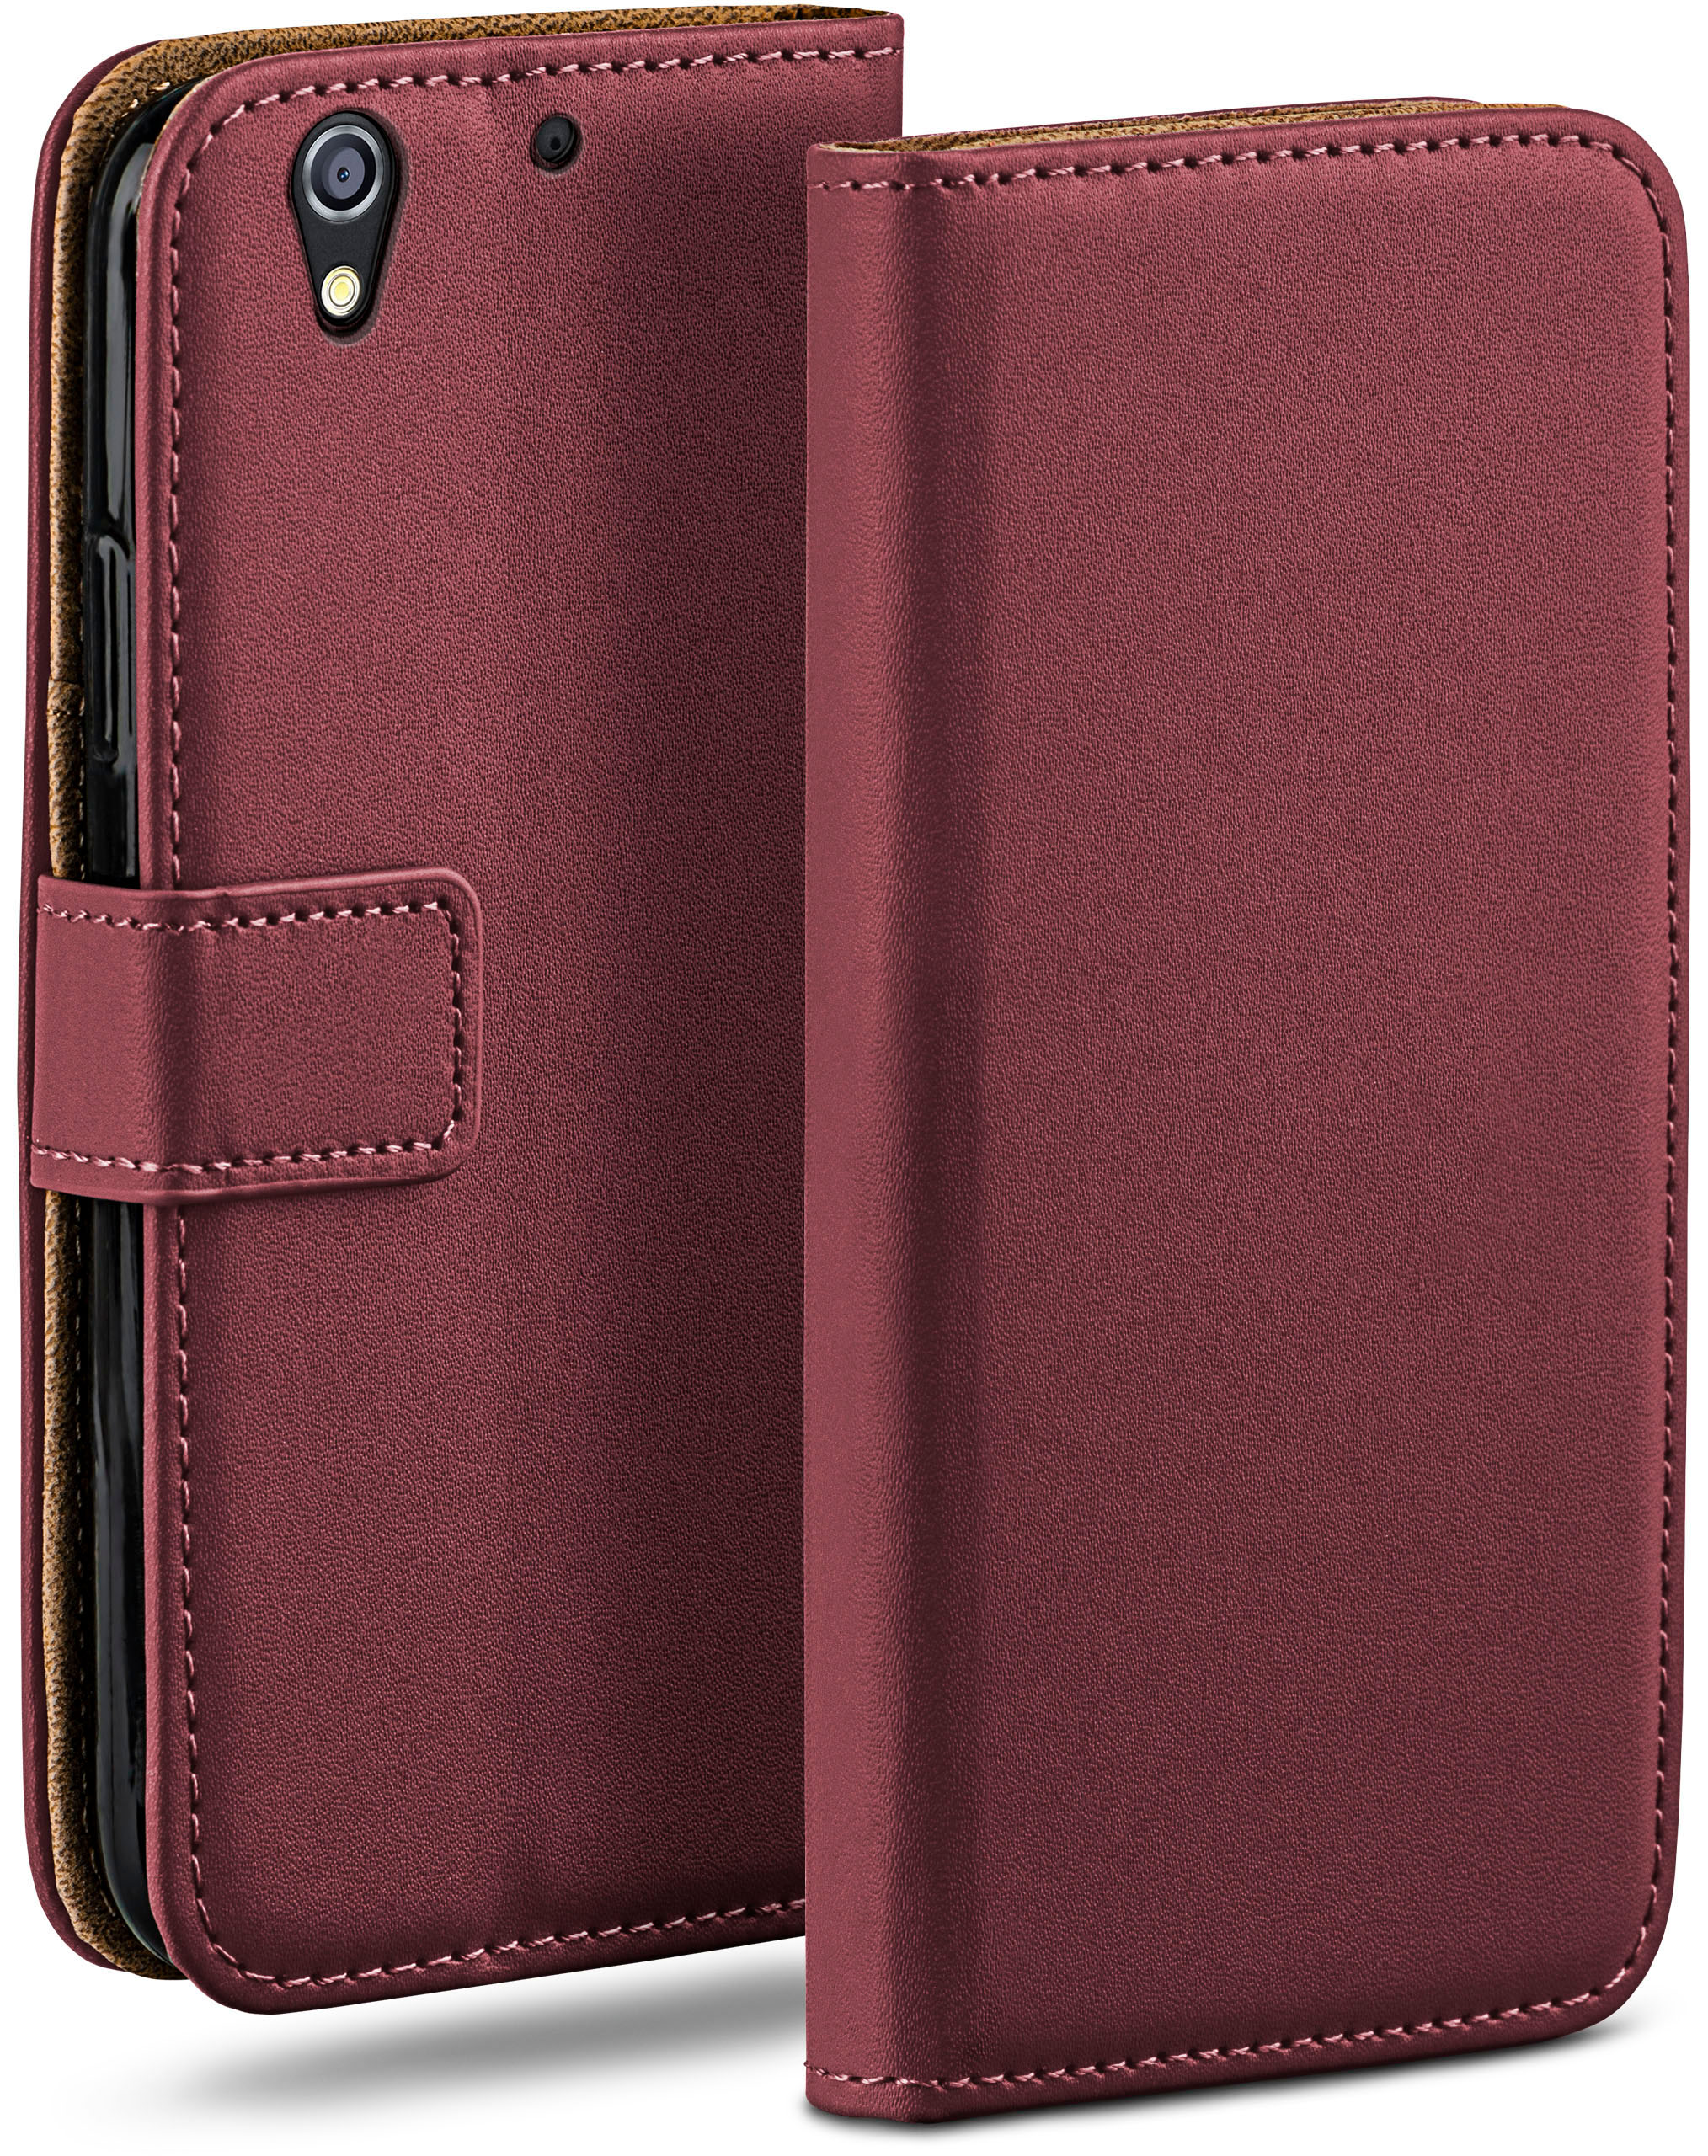 Desire Book MOEX HTC, Maroon-Red 626G, Bookcover, Case,